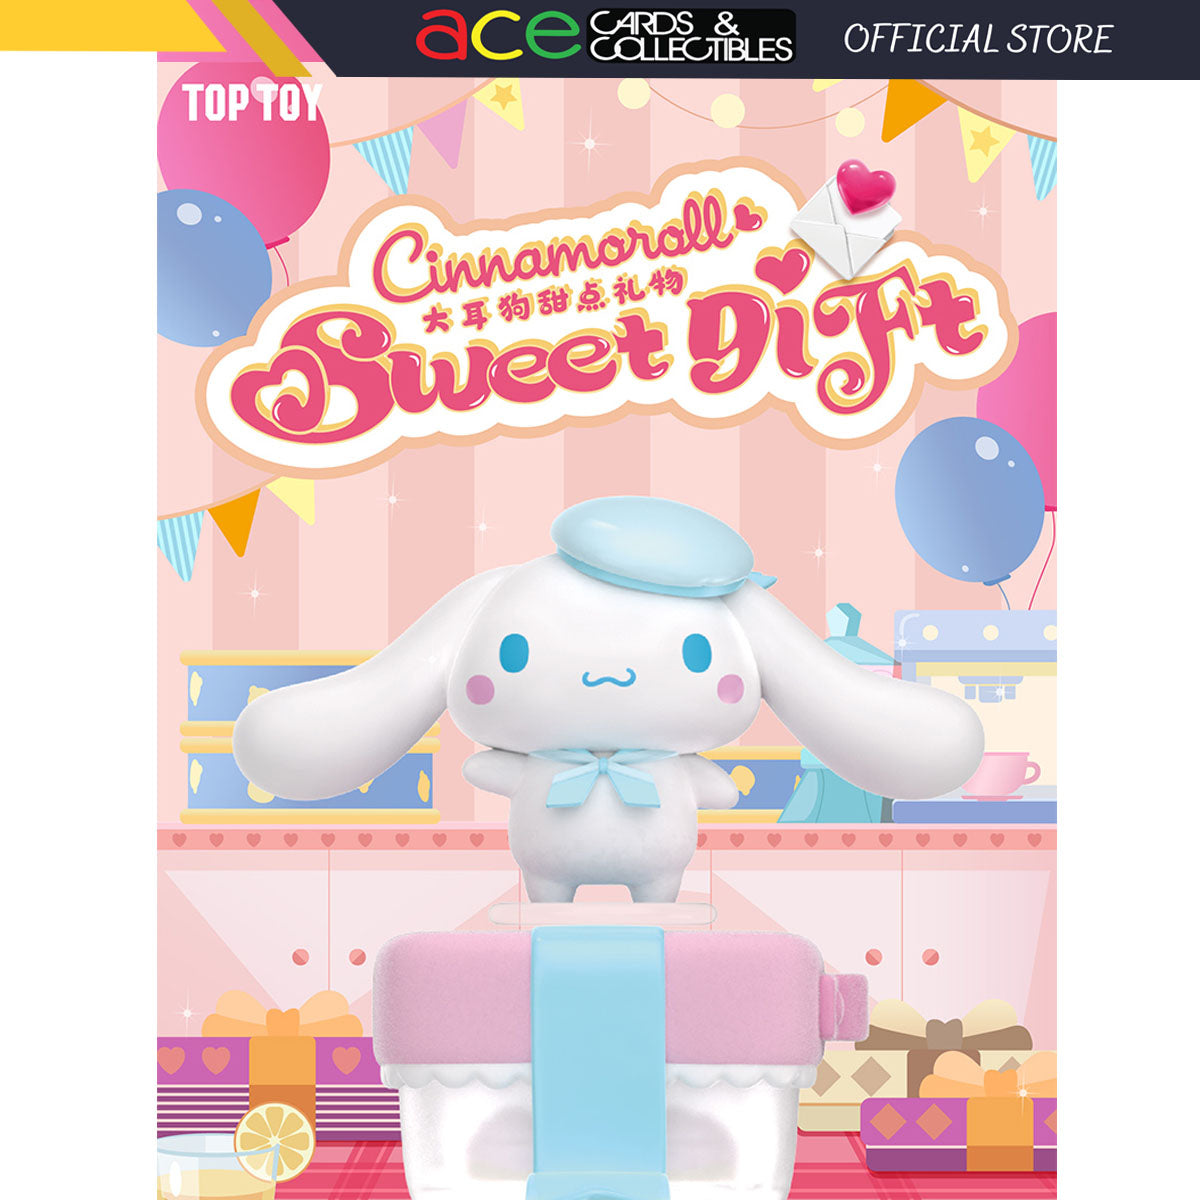 TOPTOY x Cinnamoroll Sweet Gift Chocolate Hearts Series-Display Box (8pcs)-TopToy-Ace Cards & Collectibles